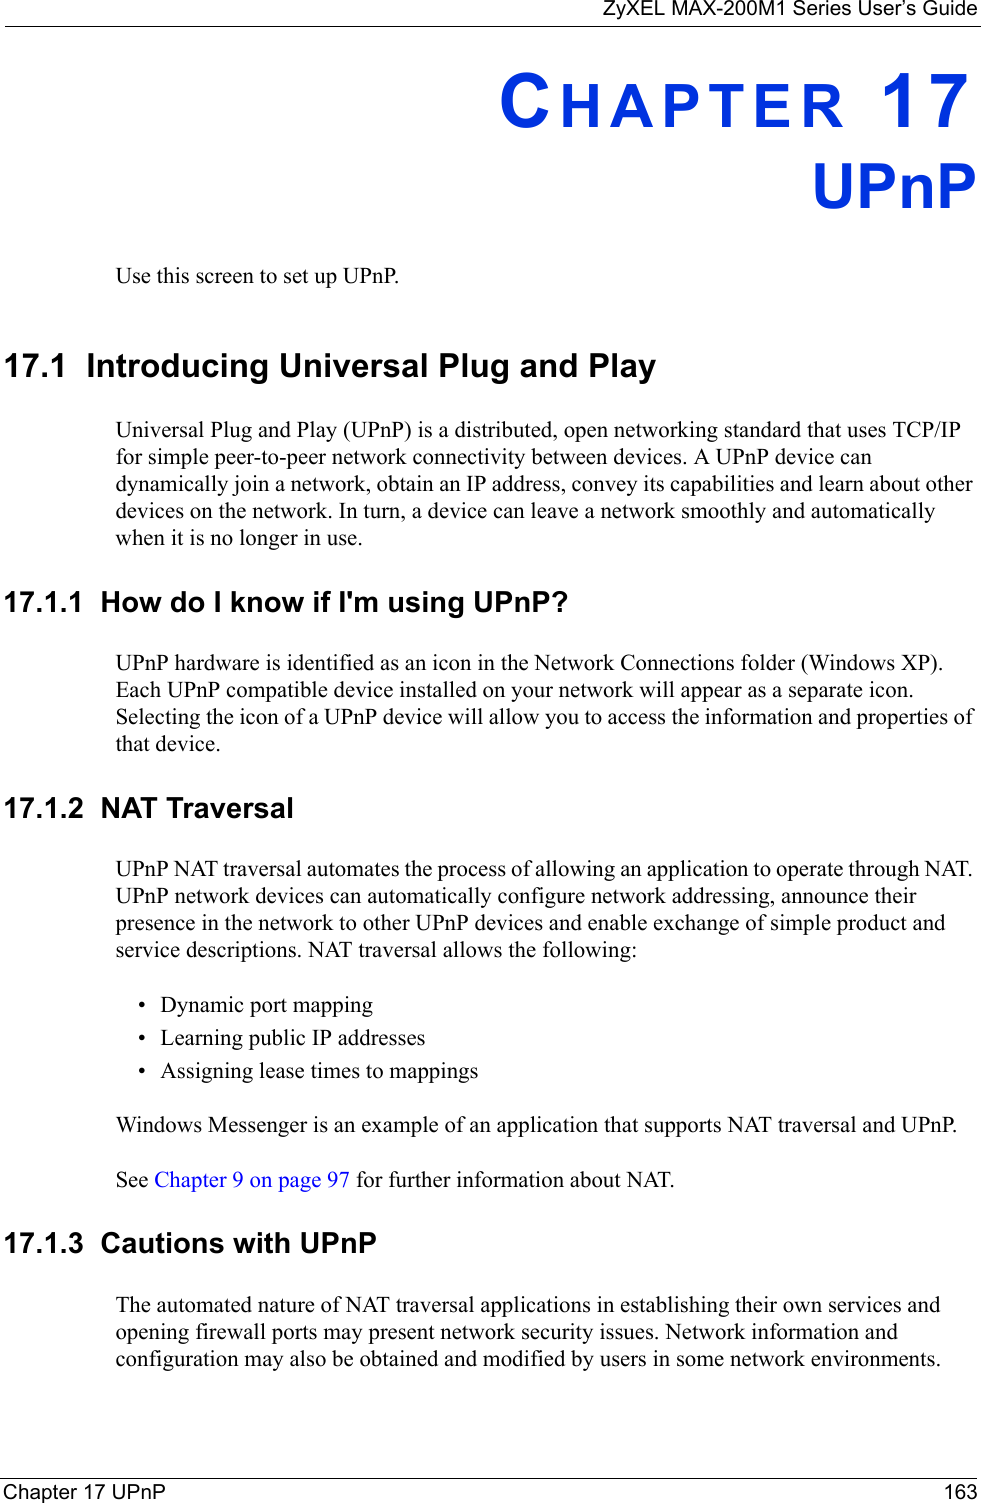 ZyXEL MAX-200M1 Series User’s GuideChapter 17 UPnP 163CHAPTER 17UPnPUse this screen to set up UPnP.17.1  Introducing Universal Plug and PlayUniversal Plug and Play (UPnP) is a distributed, open networking standard that uses TCP/IP for simple peer-to-peer network connectivity between devices. A UPnP device can dynamically join a network, obtain an IP address, convey its capabilities and learn about other devices on the network. In turn, a device can leave a network smoothly and automatically when it is no longer in use.17.1.1  How do I know if I&apos;m using UPnP? UPnP hardware is identified as an icon in the Network Connections folder (Windows XP). Each UPnP compatible device installed on your network will appear as a separate icon. Selecting the icon of a UPnP device will allow you to access the information and properties of that device. 17.1.2  NAT TraversalUPnP NAT traversal automates the process of allowing an application to operate through NAT. UPnP network devices can automatically configure network addressing, announce their presence in the network to other UPnP devices and enable exchange of simple product and service descriptions. NAT traversal allows the following:• Dynamic port mapping• Learning public IP addresses• Assigning lease times to mappingsWindows Messenger is an example of an application that supports NAT traversal and UPnP. See Chapter 9 on page 97 for further information about NAT.17.1.3  Cautions with UPnPThe automated nature of NAT traversal applications in establishing their own services and opening firewall ports may present network security issues. Network information and configuration may also be obtained and modified by users in some network environments. 